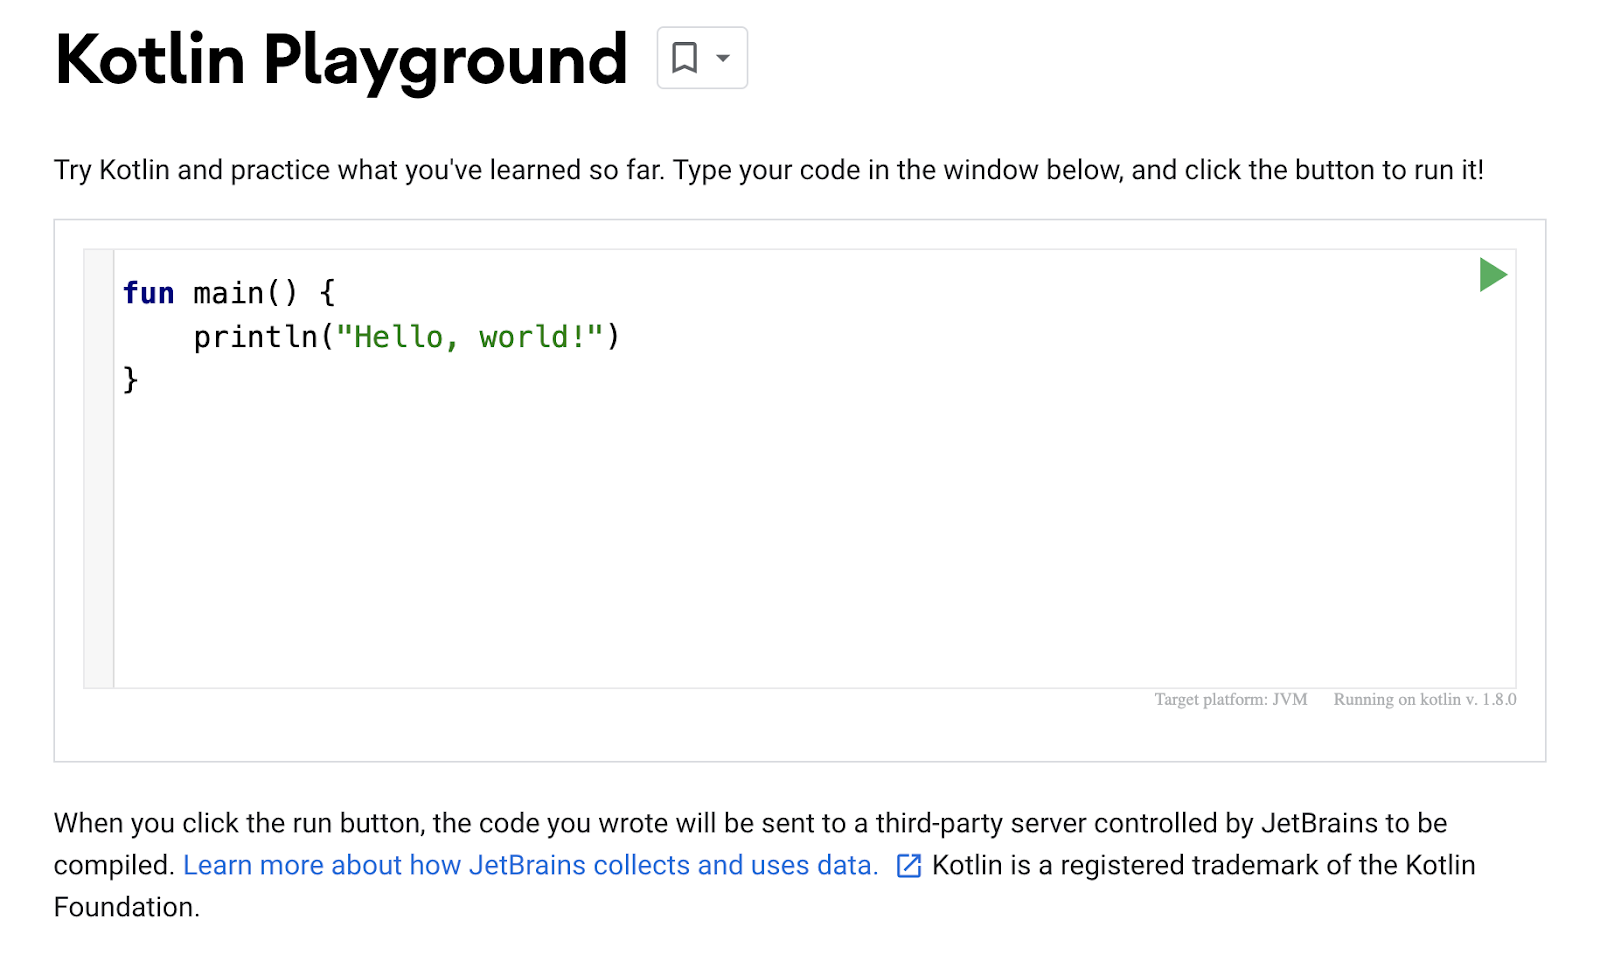 This shows a screenshot of the Kotlin Playground. The code editor shows a simple program for printing out 